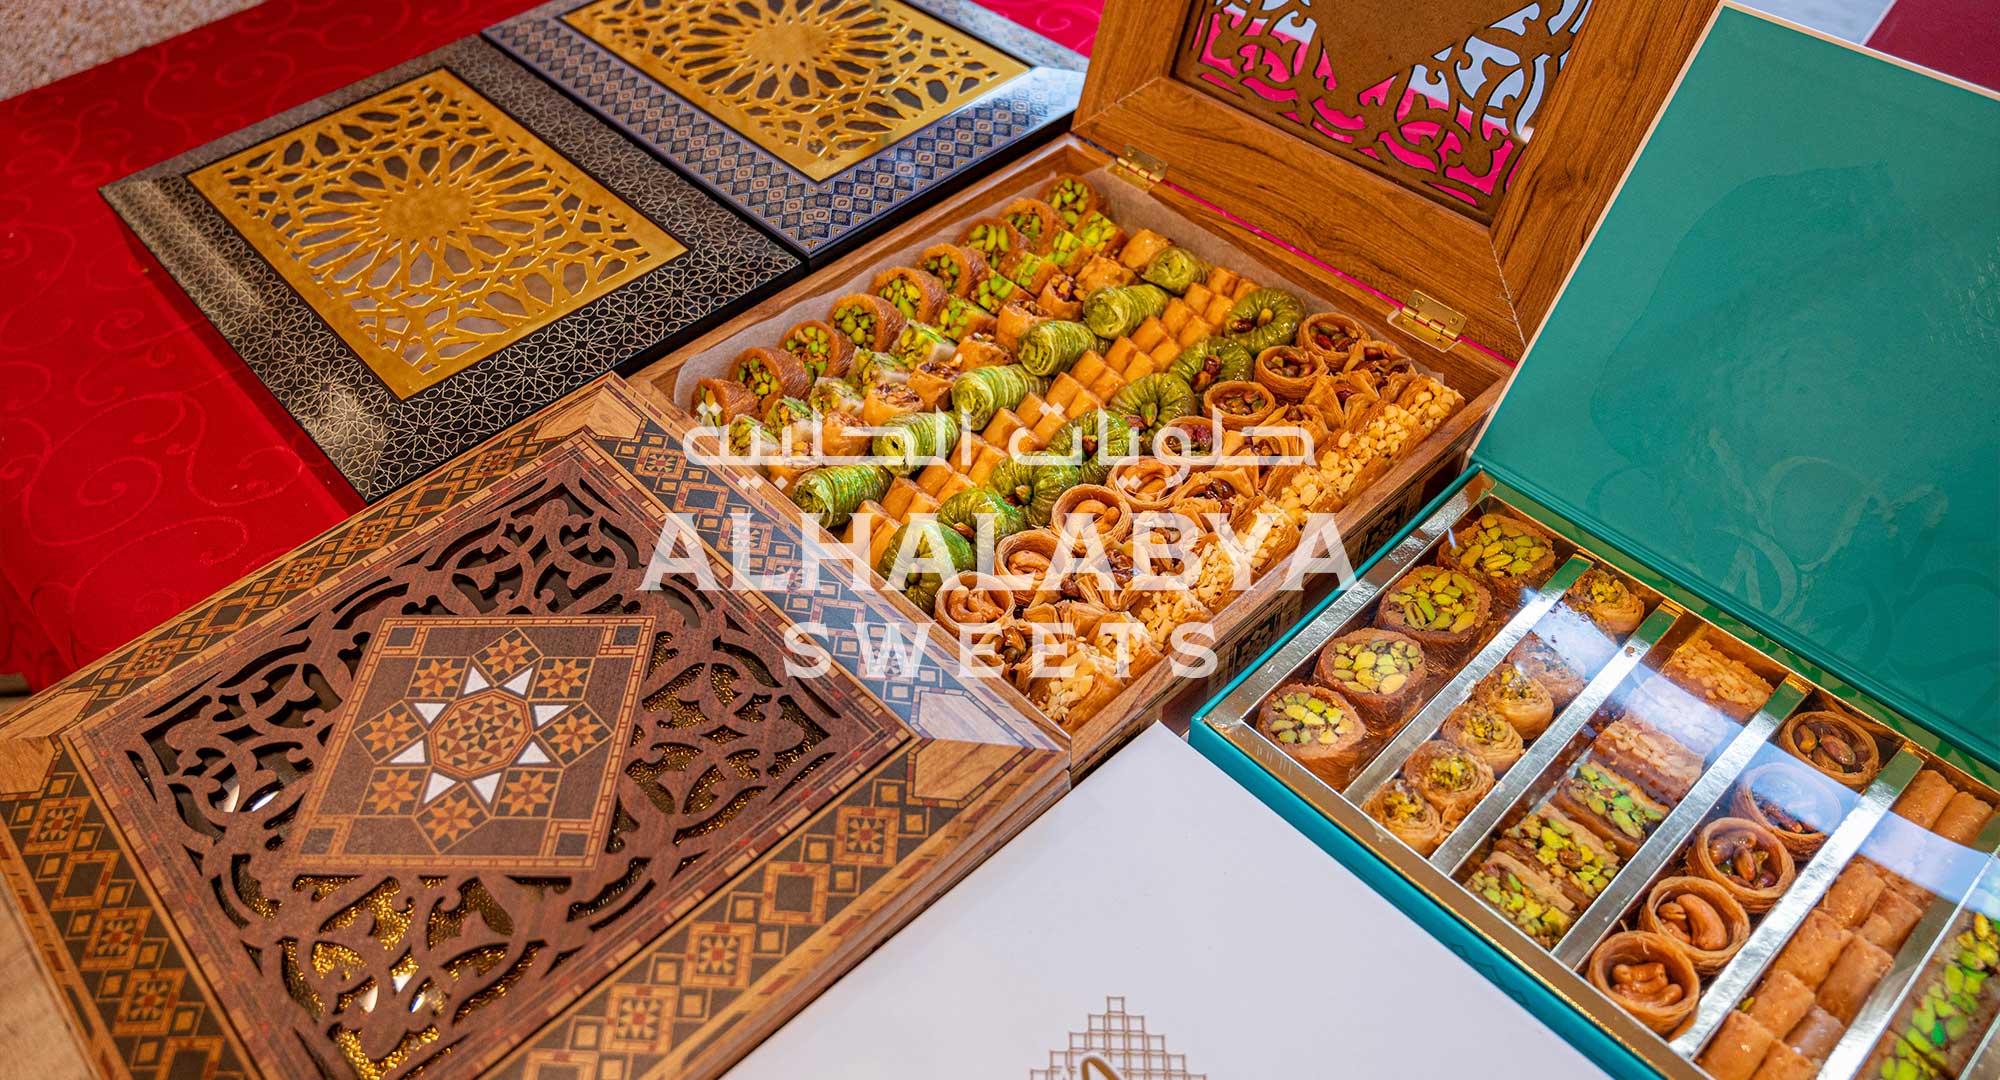 Baklava as a Gift in Sharjah Culture